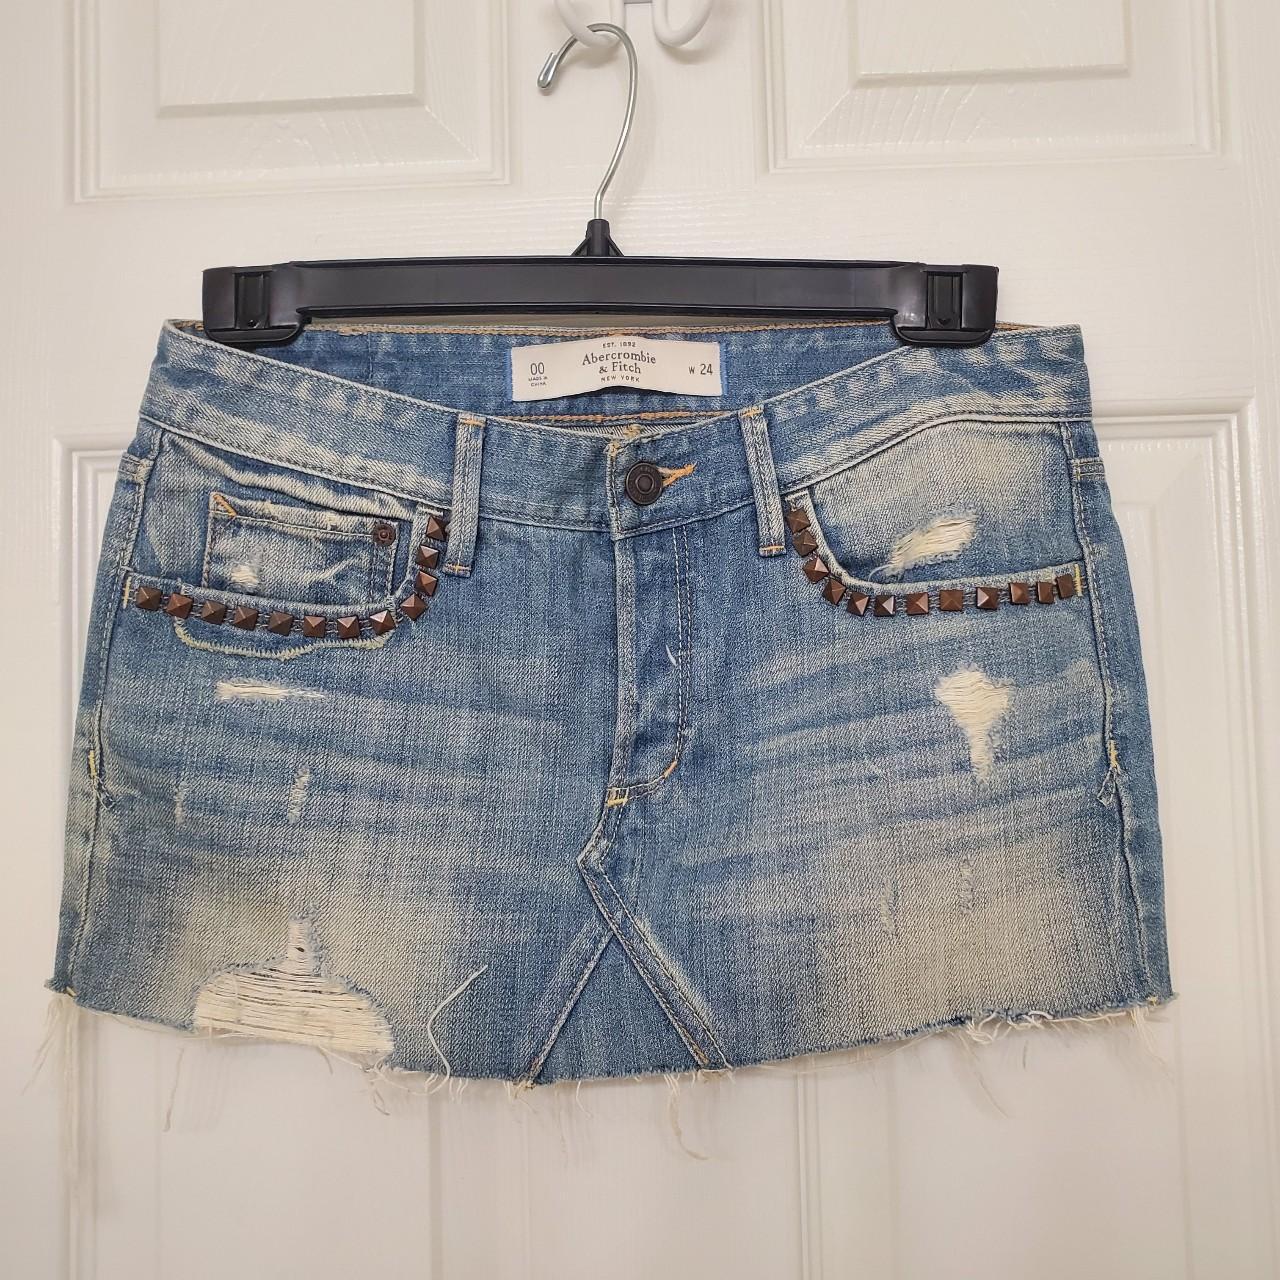 Abercrombie & Fitch Women's Blue Skirt (2)